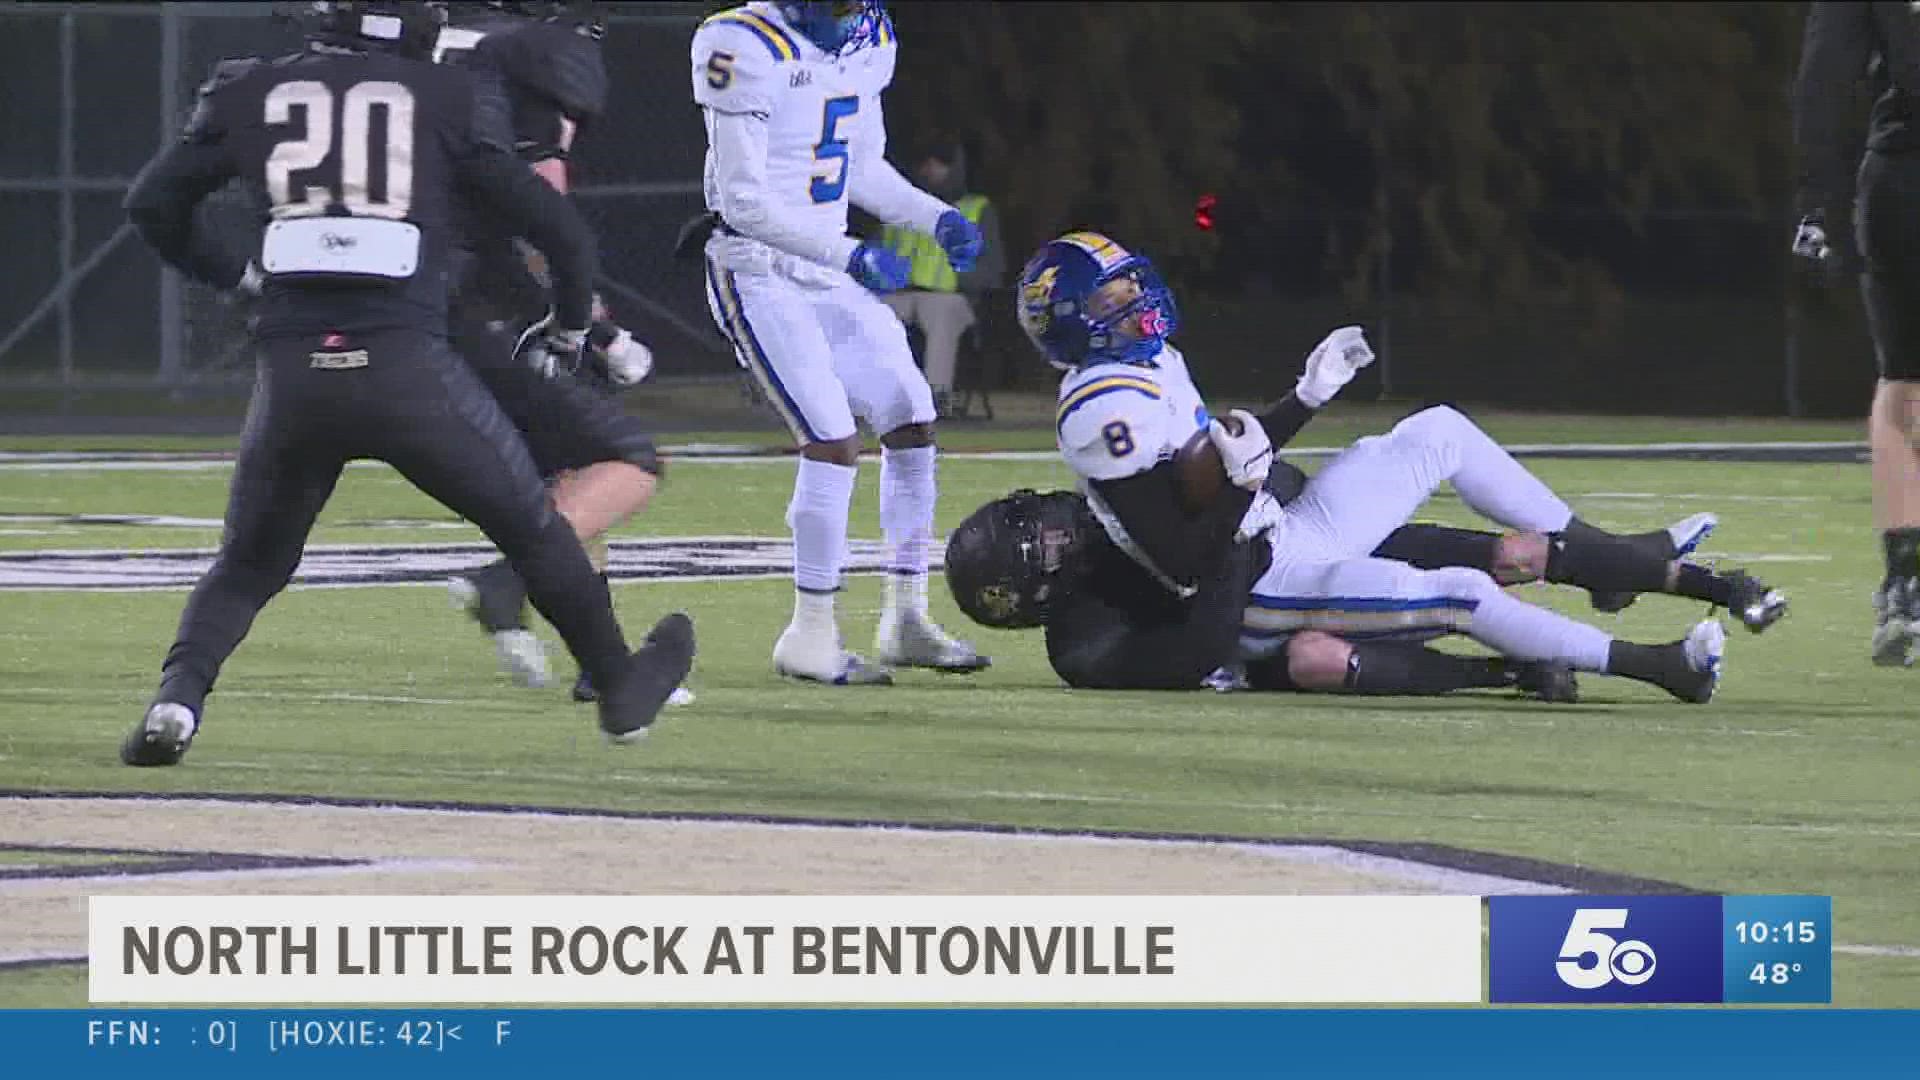 The Wildcats' offense was too much for Bentonville to handle, ending the Tigers' playoff hopes.